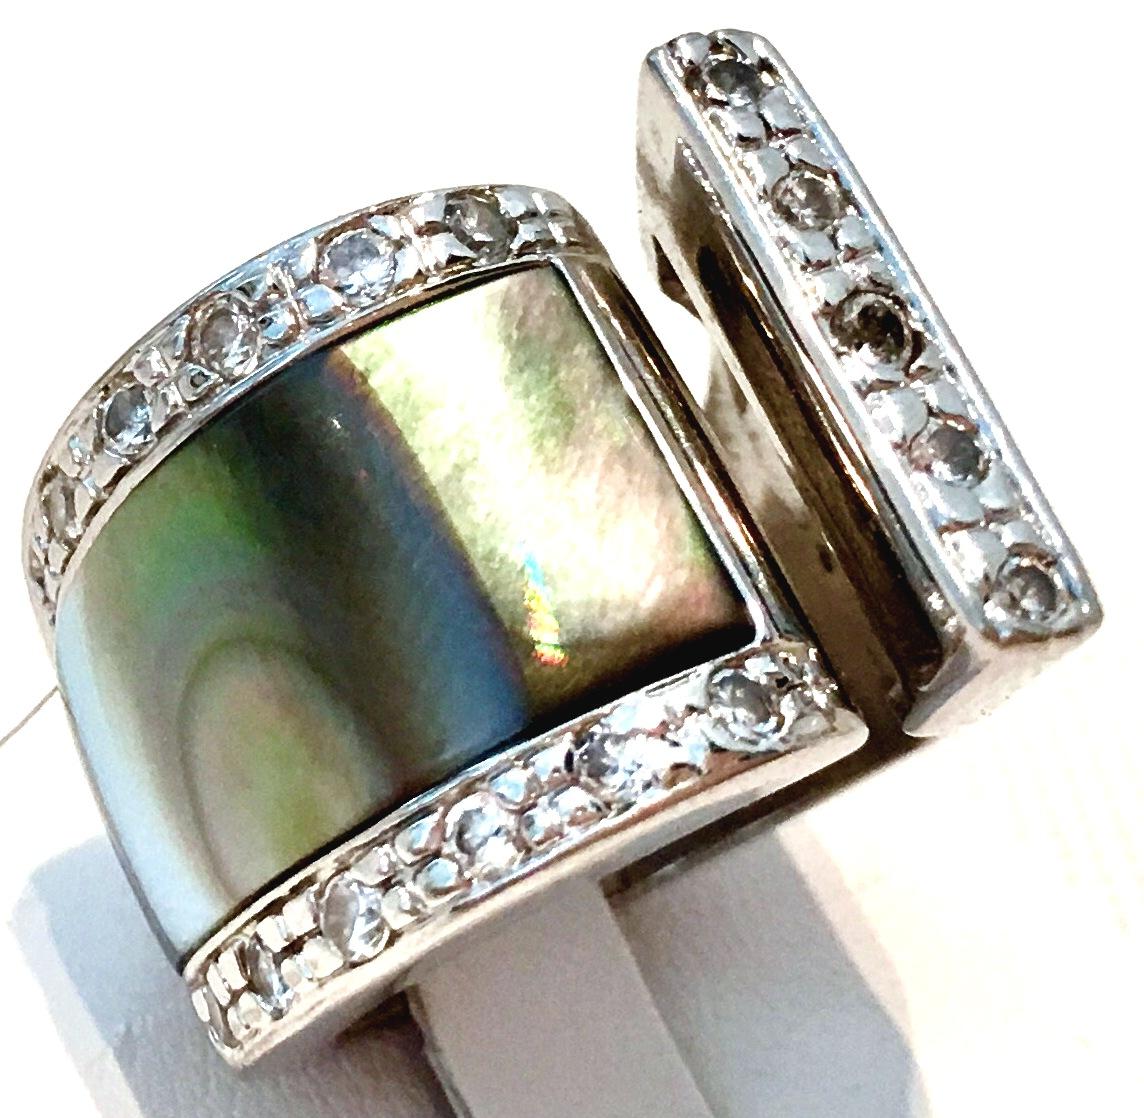 abalone rings for sale